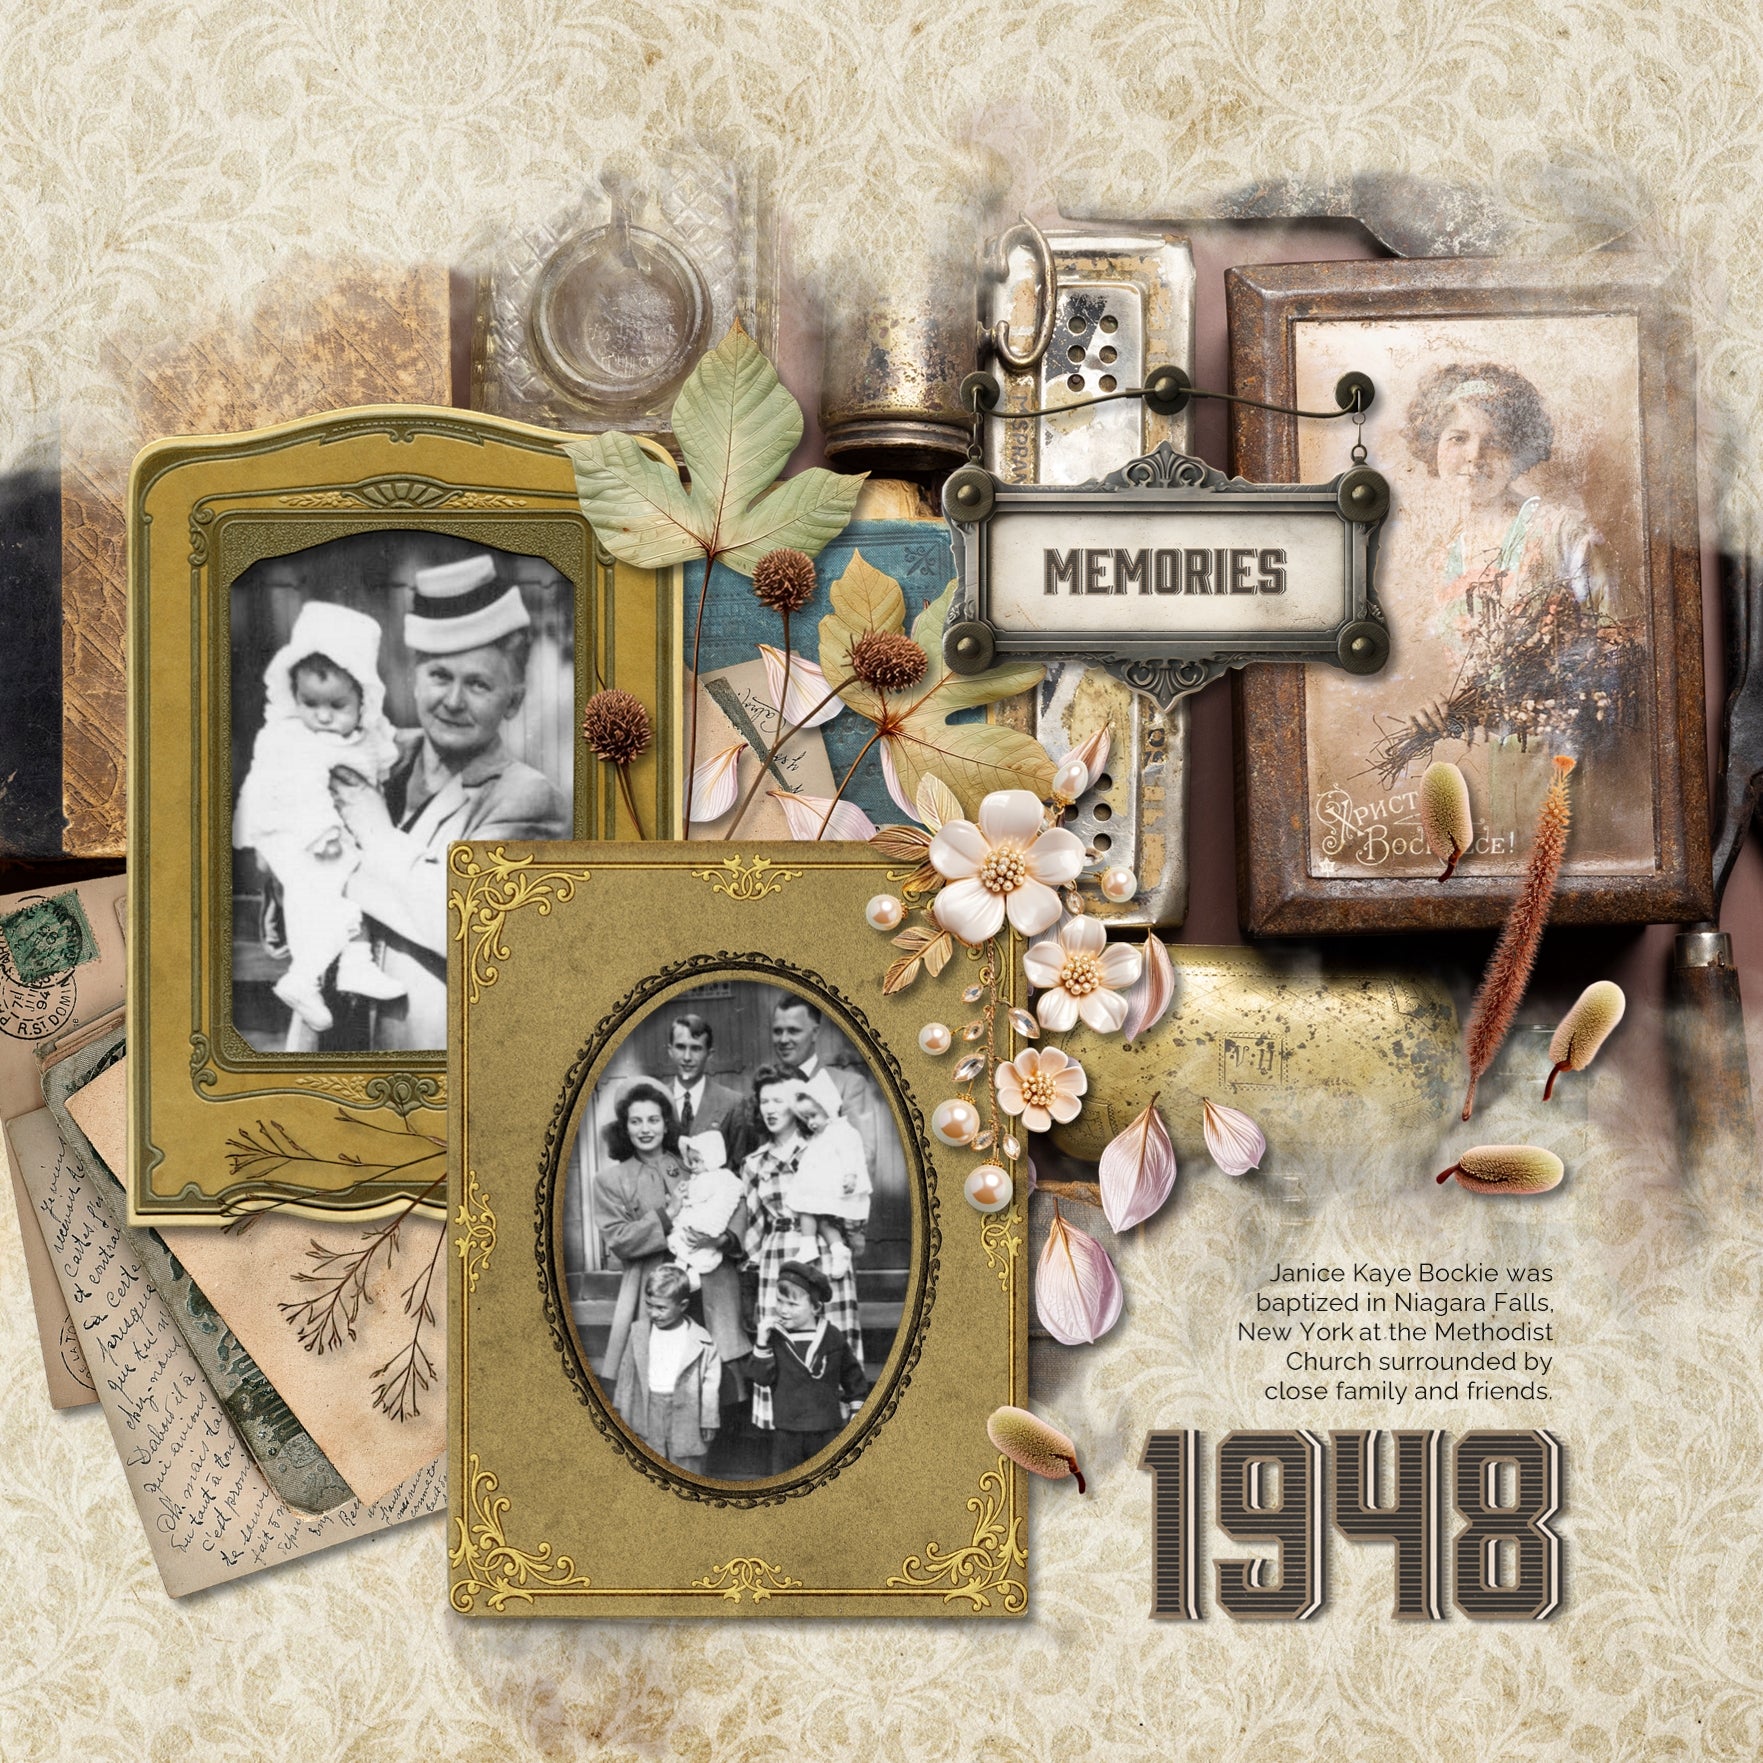 Great for genealogy and family history albums and keepsake digital art pages, these ornate word art signs by Lucky Girl Creative are perfect for layering with your antique photographs to give that realistic vintage look. Word art includes Antiques, Art, Collectibles, Faith, Family, Genealogy, Handmade, Heritage, History, Home, Jewelry, Jewellery, Journals, Letters, Library, Literature, Love, Memories, Music, Nature, Photographs, Theater, Theatre, Time, Travel, Treasures, and Vintage.